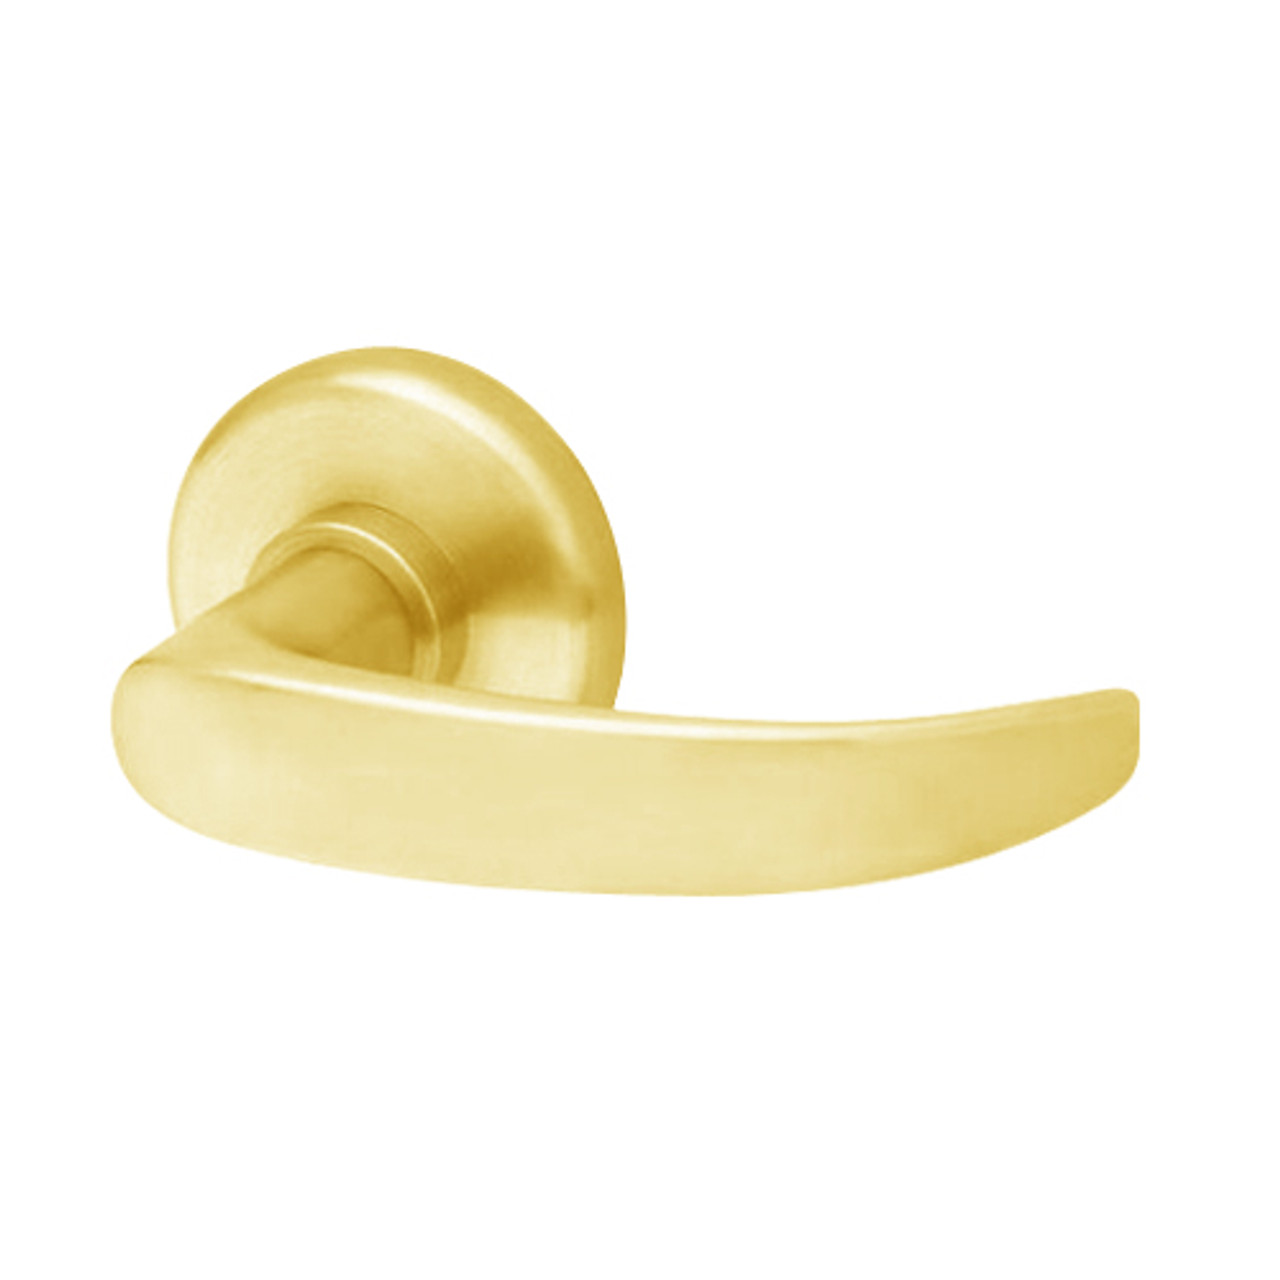 40HTKOS314R605 Best 40H Series Trim Kits Outside Lever w/ Emergency Plate with Curved Return Style in Bright Brass